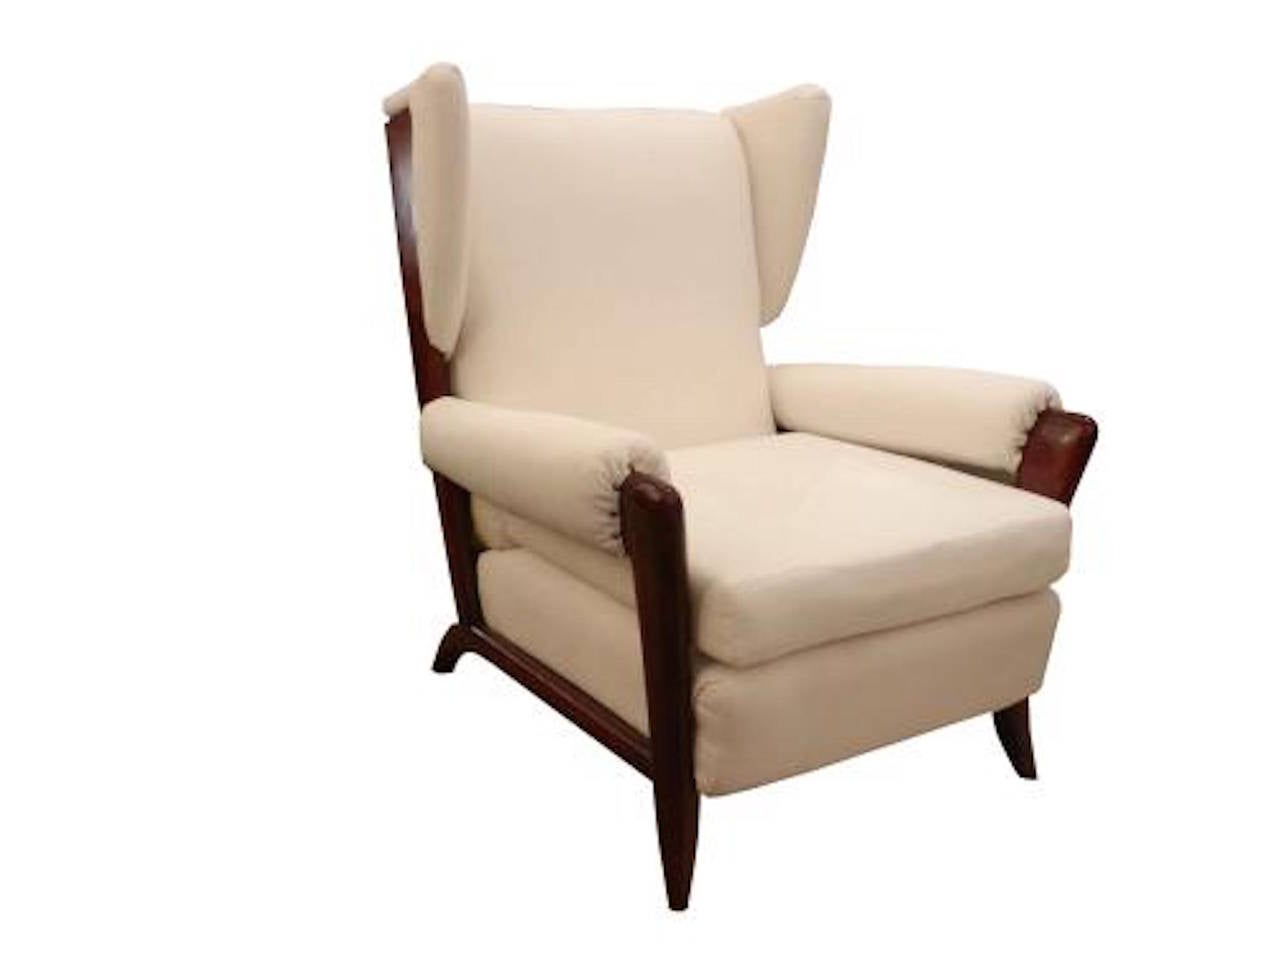 A pair of club chairs each featuring frames in stained Mahogany with small side wings, loose seat cushions, separate armrests and extended back legs. The clubs are upholstered in muslin and are ready for final upholstery. Fully documented. Paolo